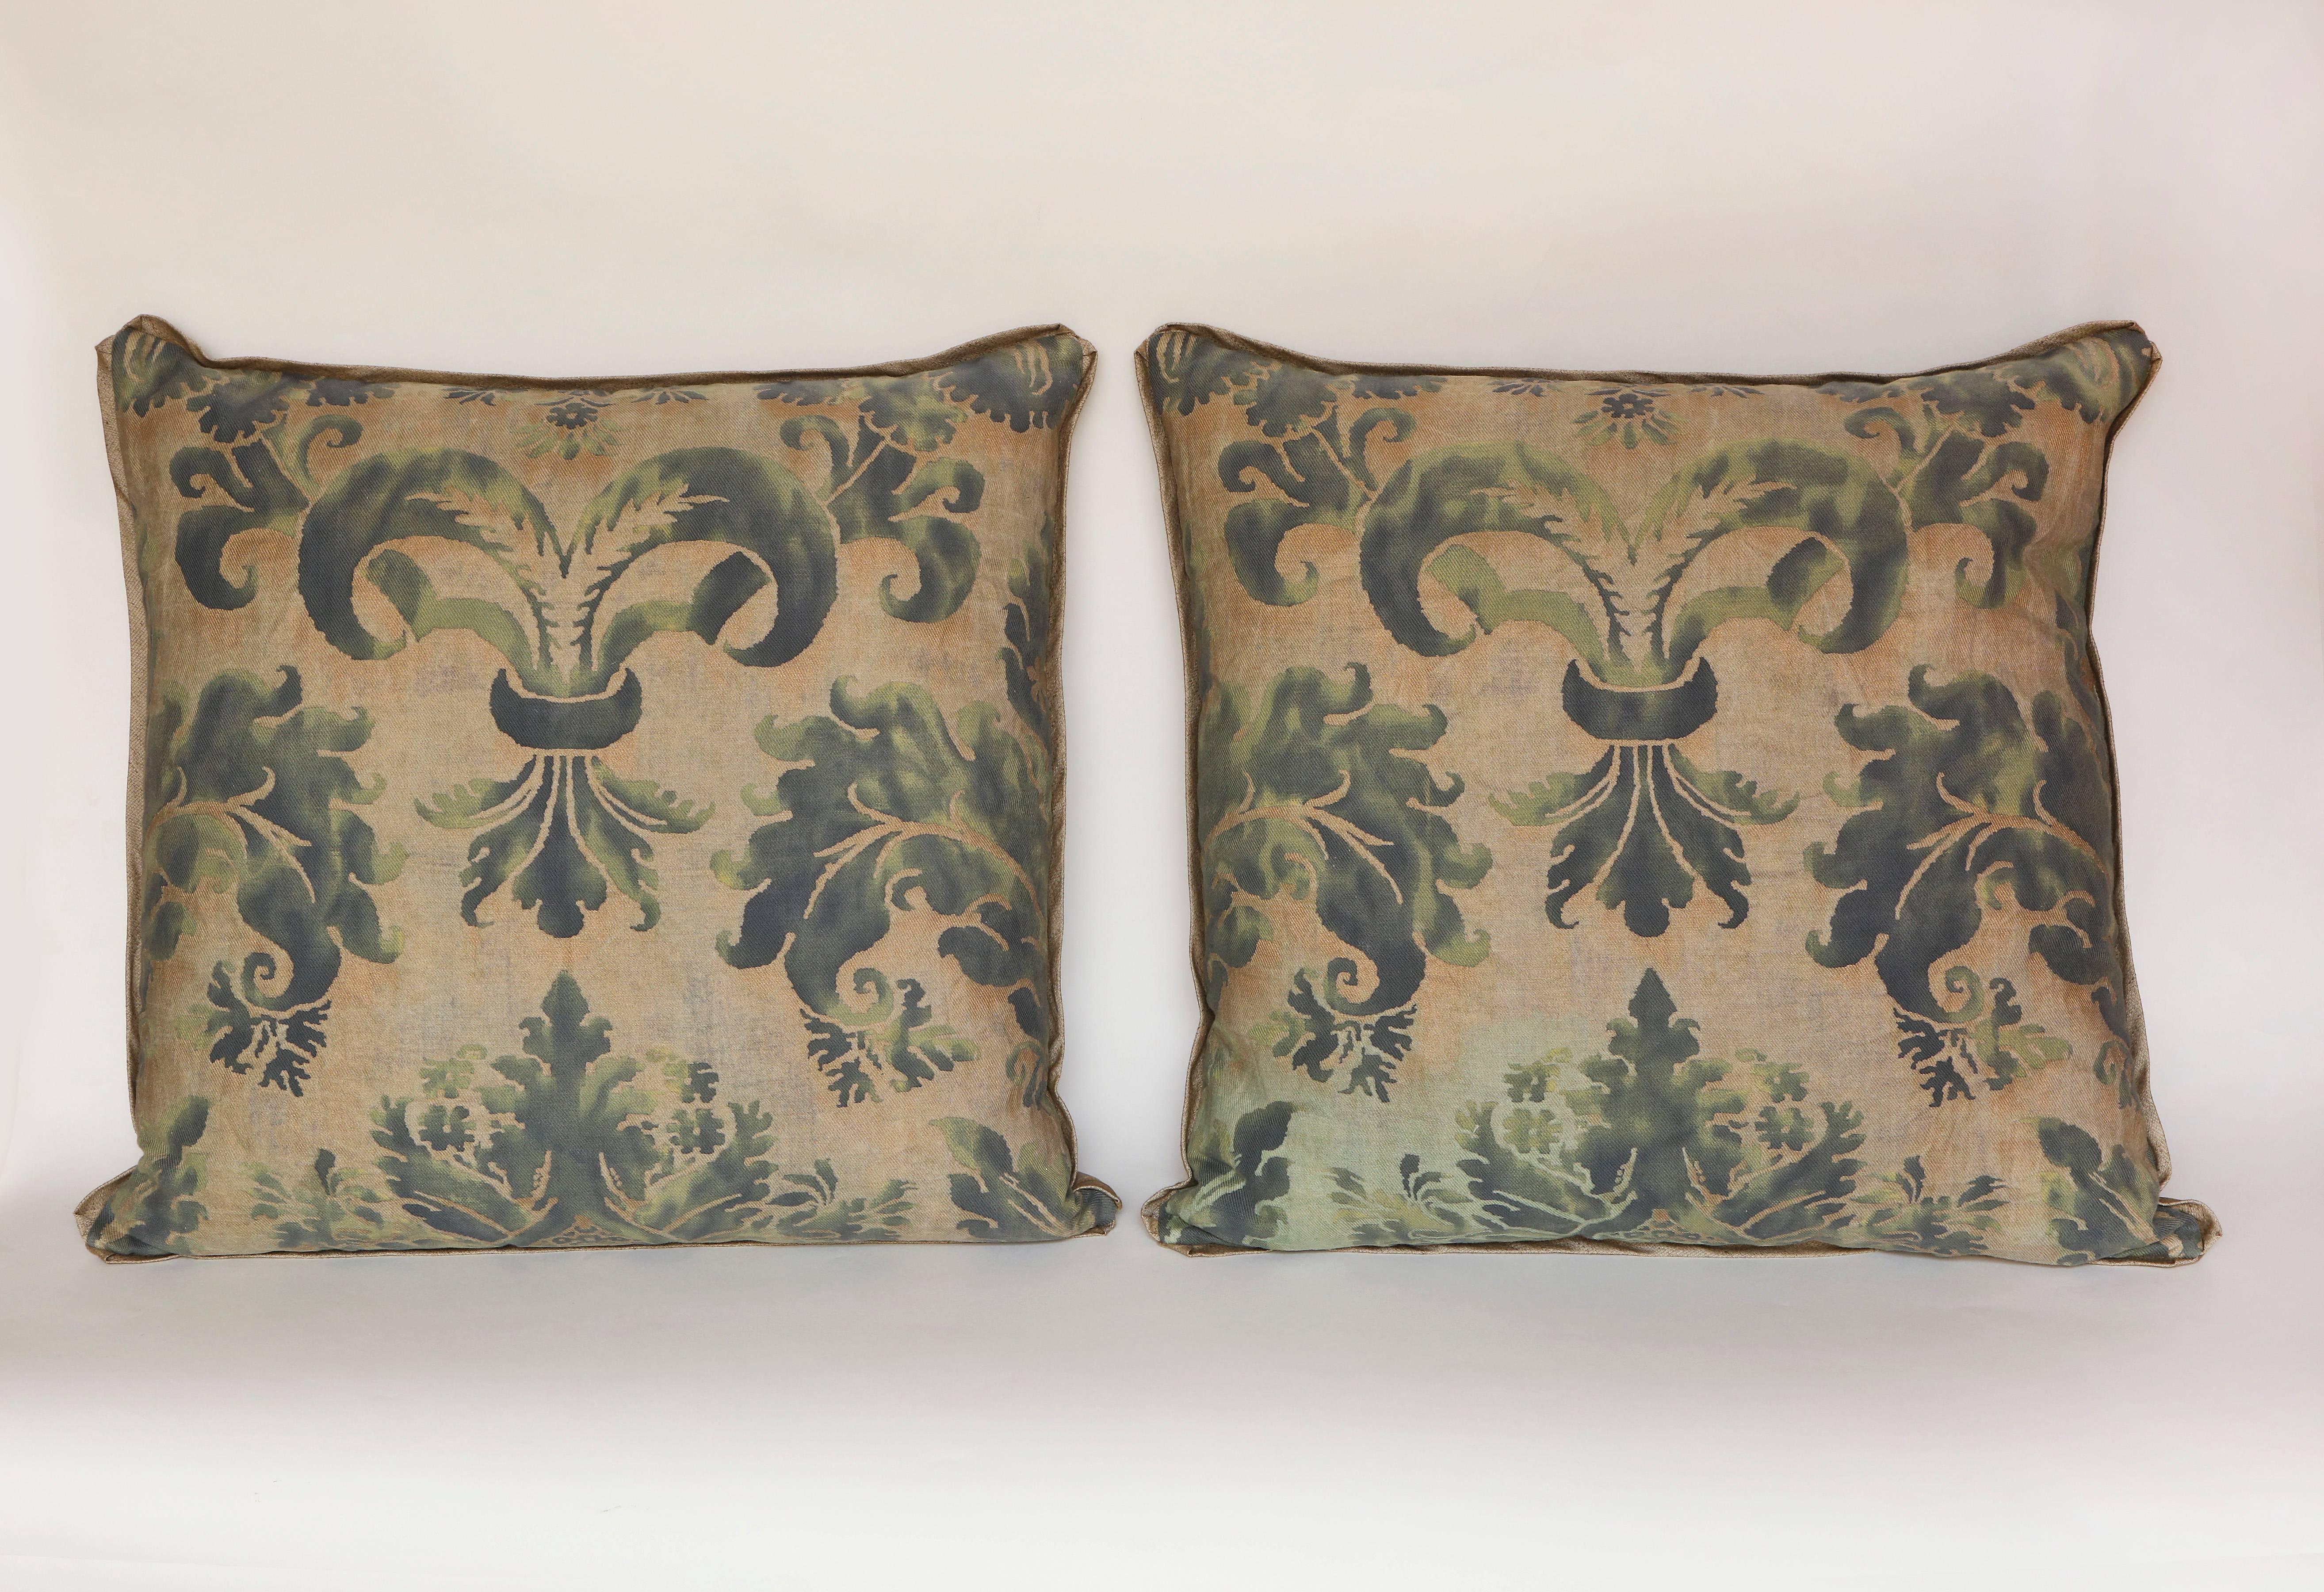 A pair of square Vintage Fortuny fabric cushions in the Glicine pattern, a 17th century Italian design. Green colorway with silk edging.